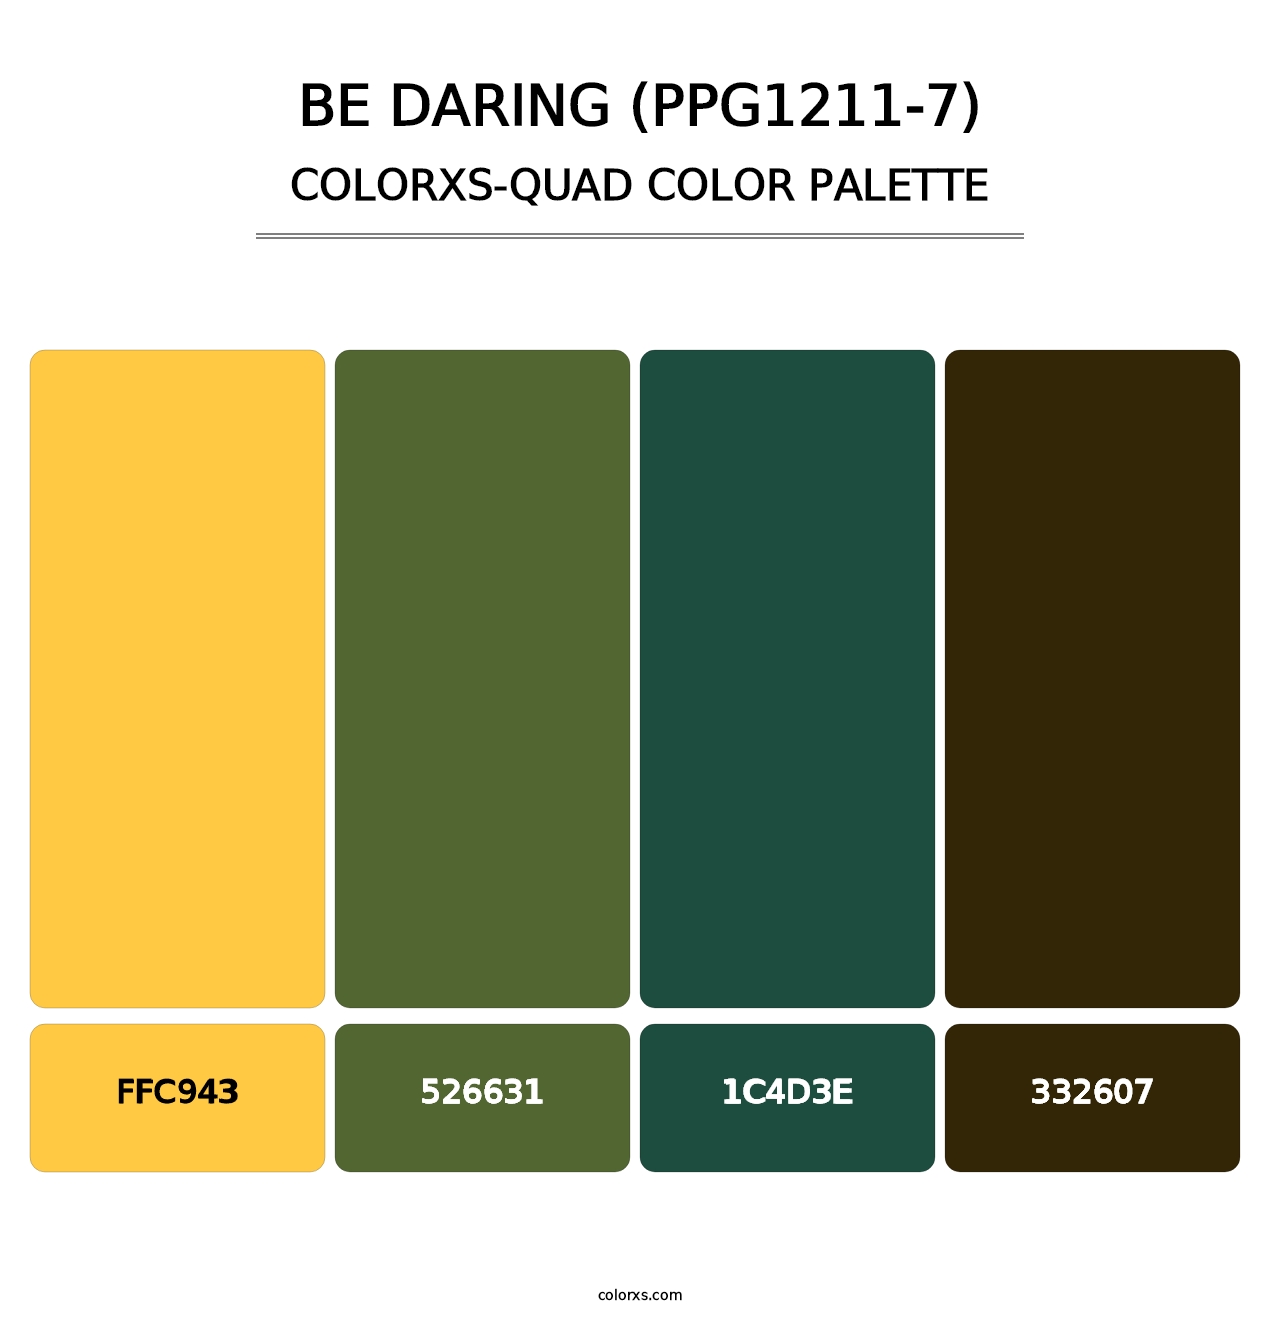 Be Daring (PPG1211-7) - Colorxs Quad Palette